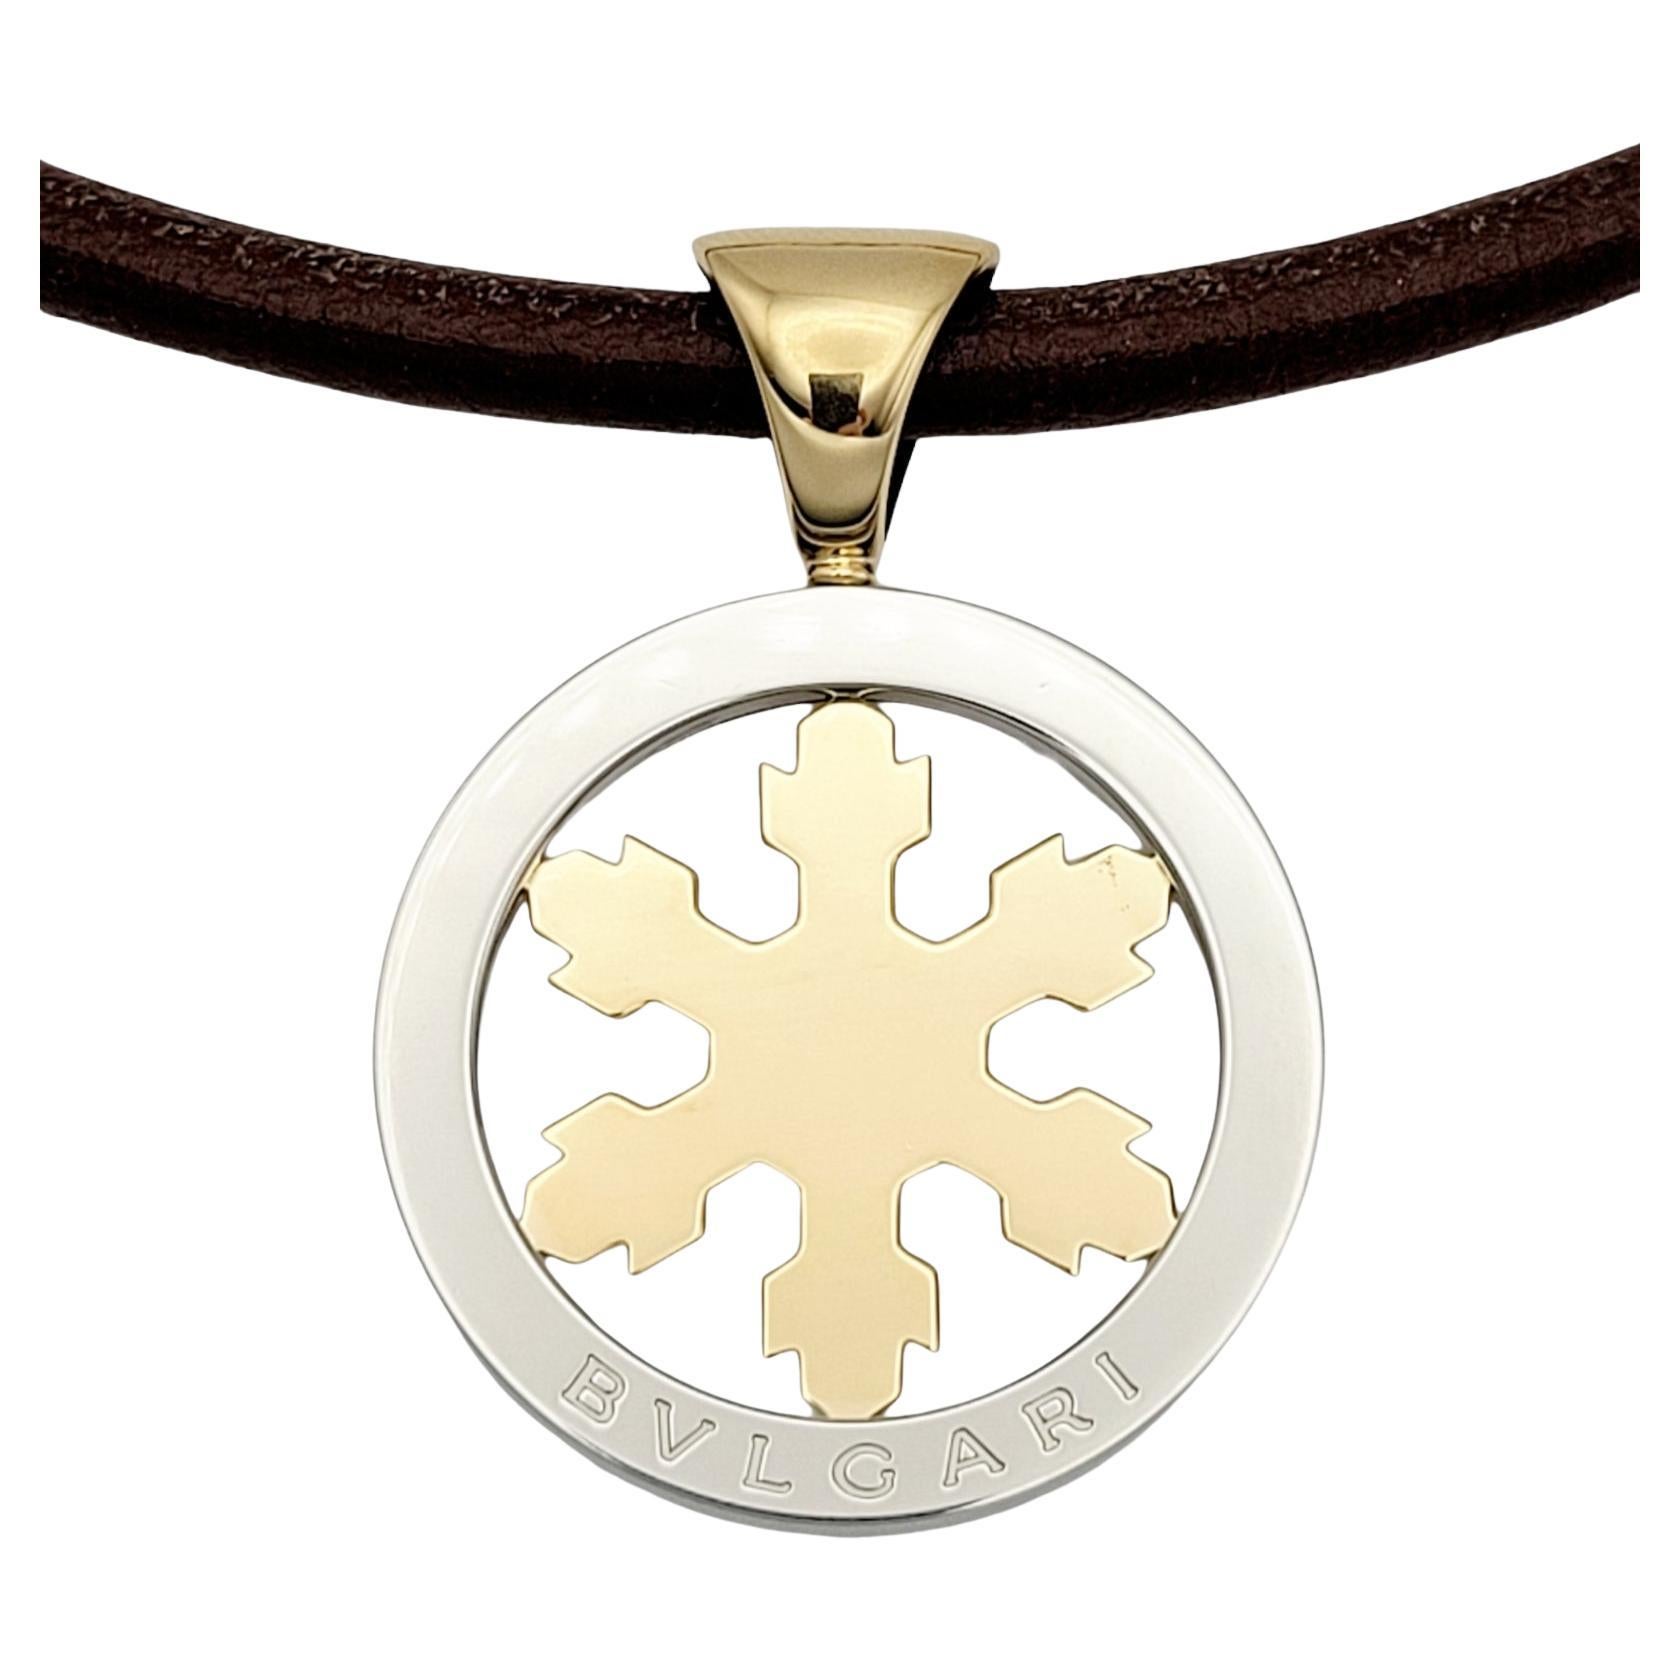 Bvlgari Tondo Snowflake Leather Necklace in 18k Yellow Gold & Stainless Steel